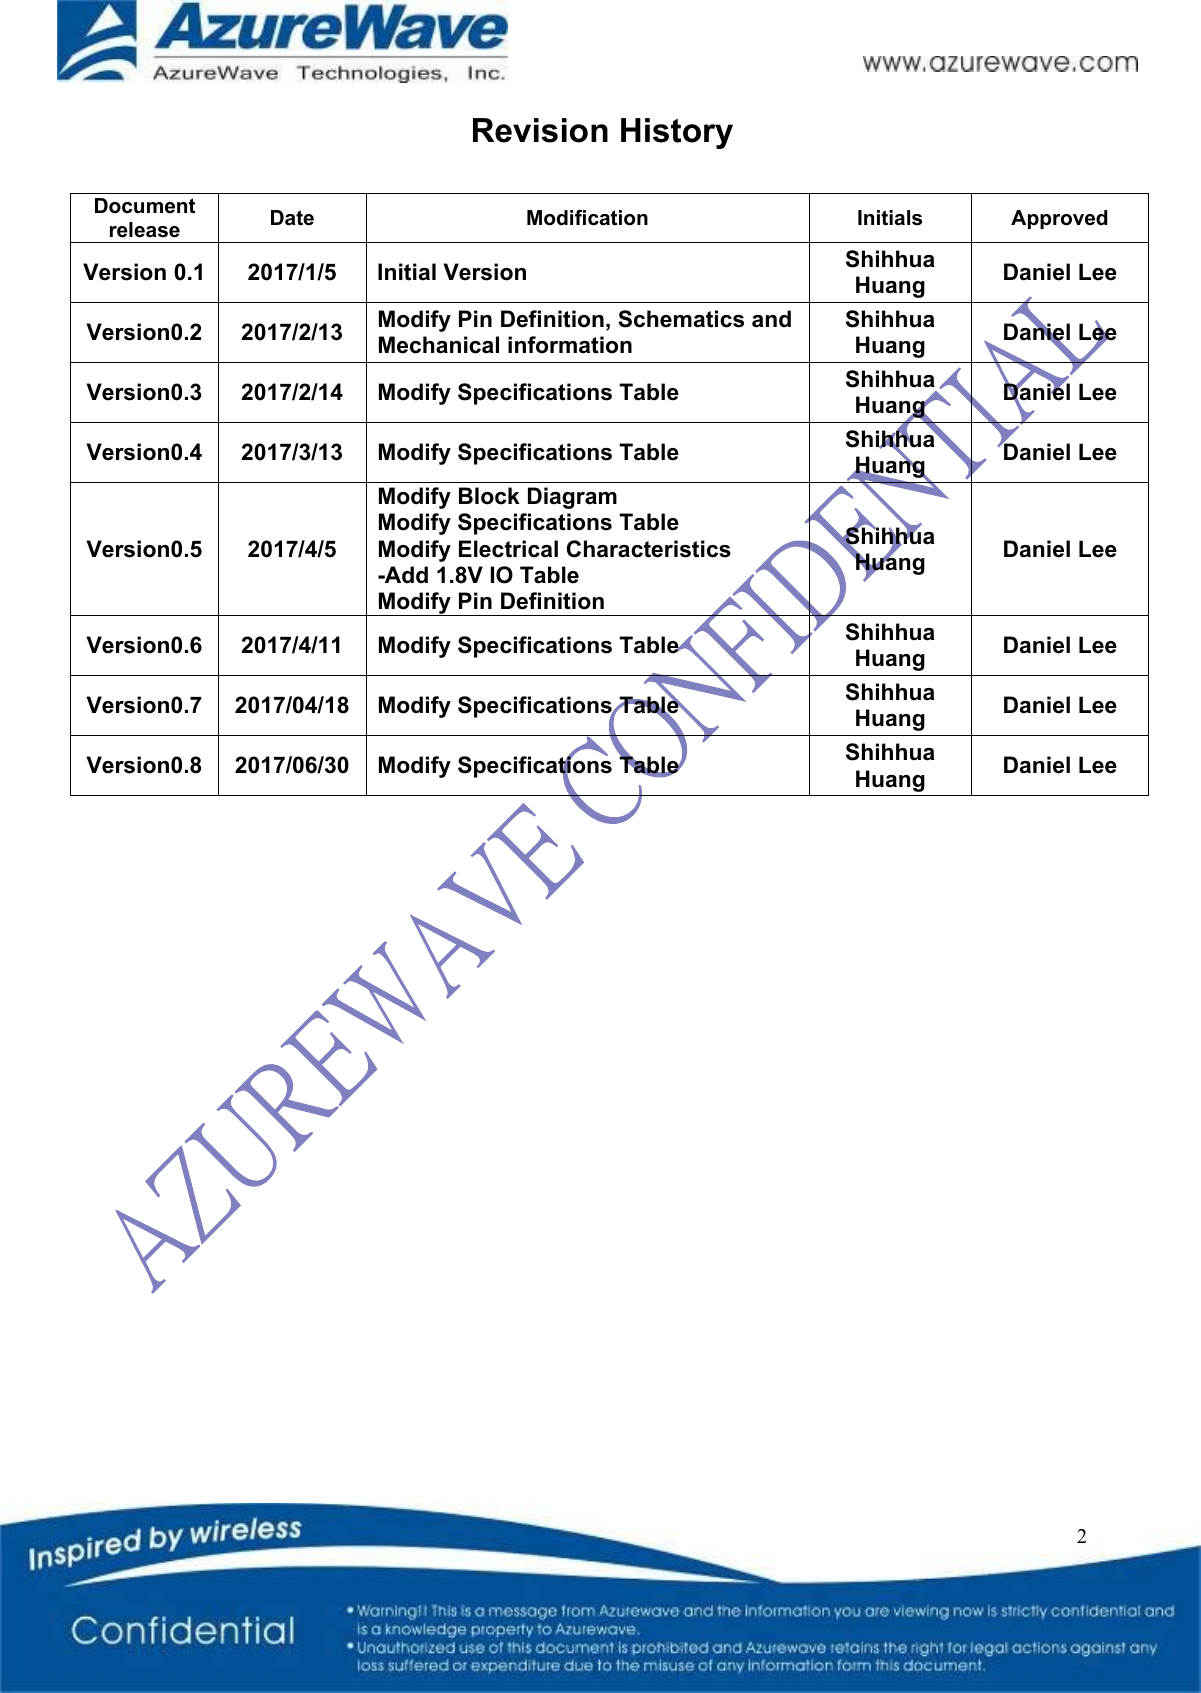   2 Revision History  Document release  Date  Modification  Initials  Approved Version 0.1  2017/1/5  Initial Version  Shihhua Huang  Daniel Lee Version0.2  2017/2/13  Modify Pin Definition, Schematics and Mechanical information Shihhua Huang  Daniel Lee Version0.3  2017/2/14  Modify Specifications Table  Shihhua Huang  Daniel Lee Version0.4  2017/3/13  Modify Specifications Table  Shihhua Huang  Daniel Lee Version0.5  2017/4/5 Modify Block Diagram Modify Specifications Table Modify Electrical Characteristics -Add 1.8V IO Table Modify Pin Definition Shihhua Huang  Daniel Lee Version0.6  2017/4/11  Modify Specifications Table  Shihhua Huang  Daniel Lee Version0.7  2017/04/18 Modify Specifications Table  Shihhua Huang  Daniel Lee Version0.8  2017/06/30 Modify Specifications Table  Shihhua Huang  Daniel Lee           